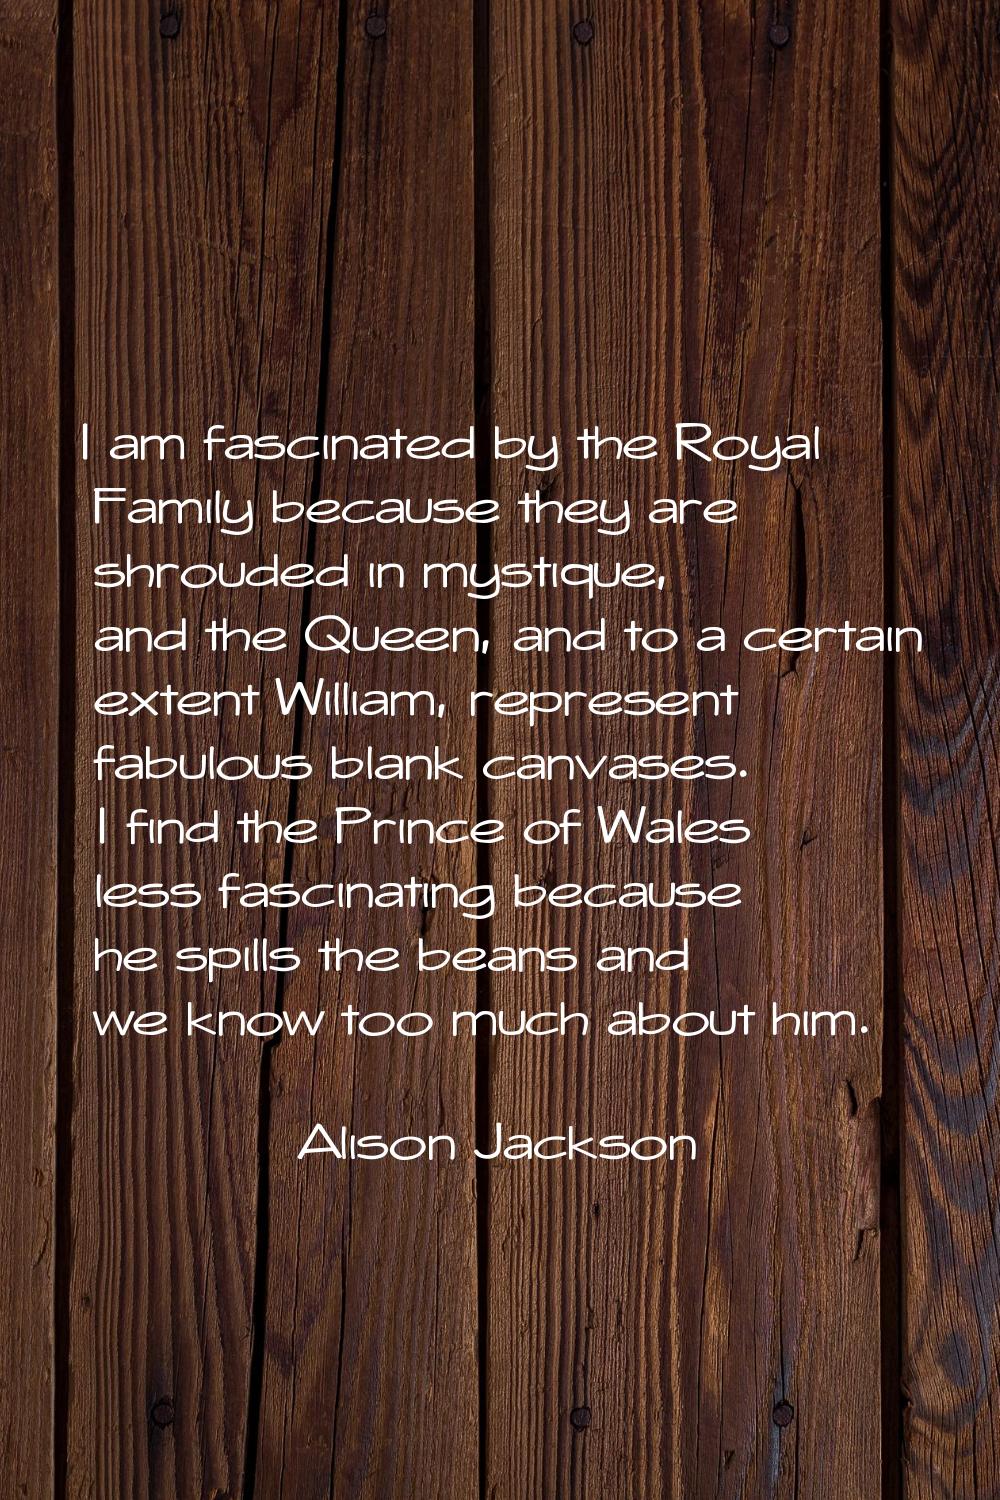 I am fascinated by the Royal Family because they are shrouded in mystique, and the Queen, and to a 